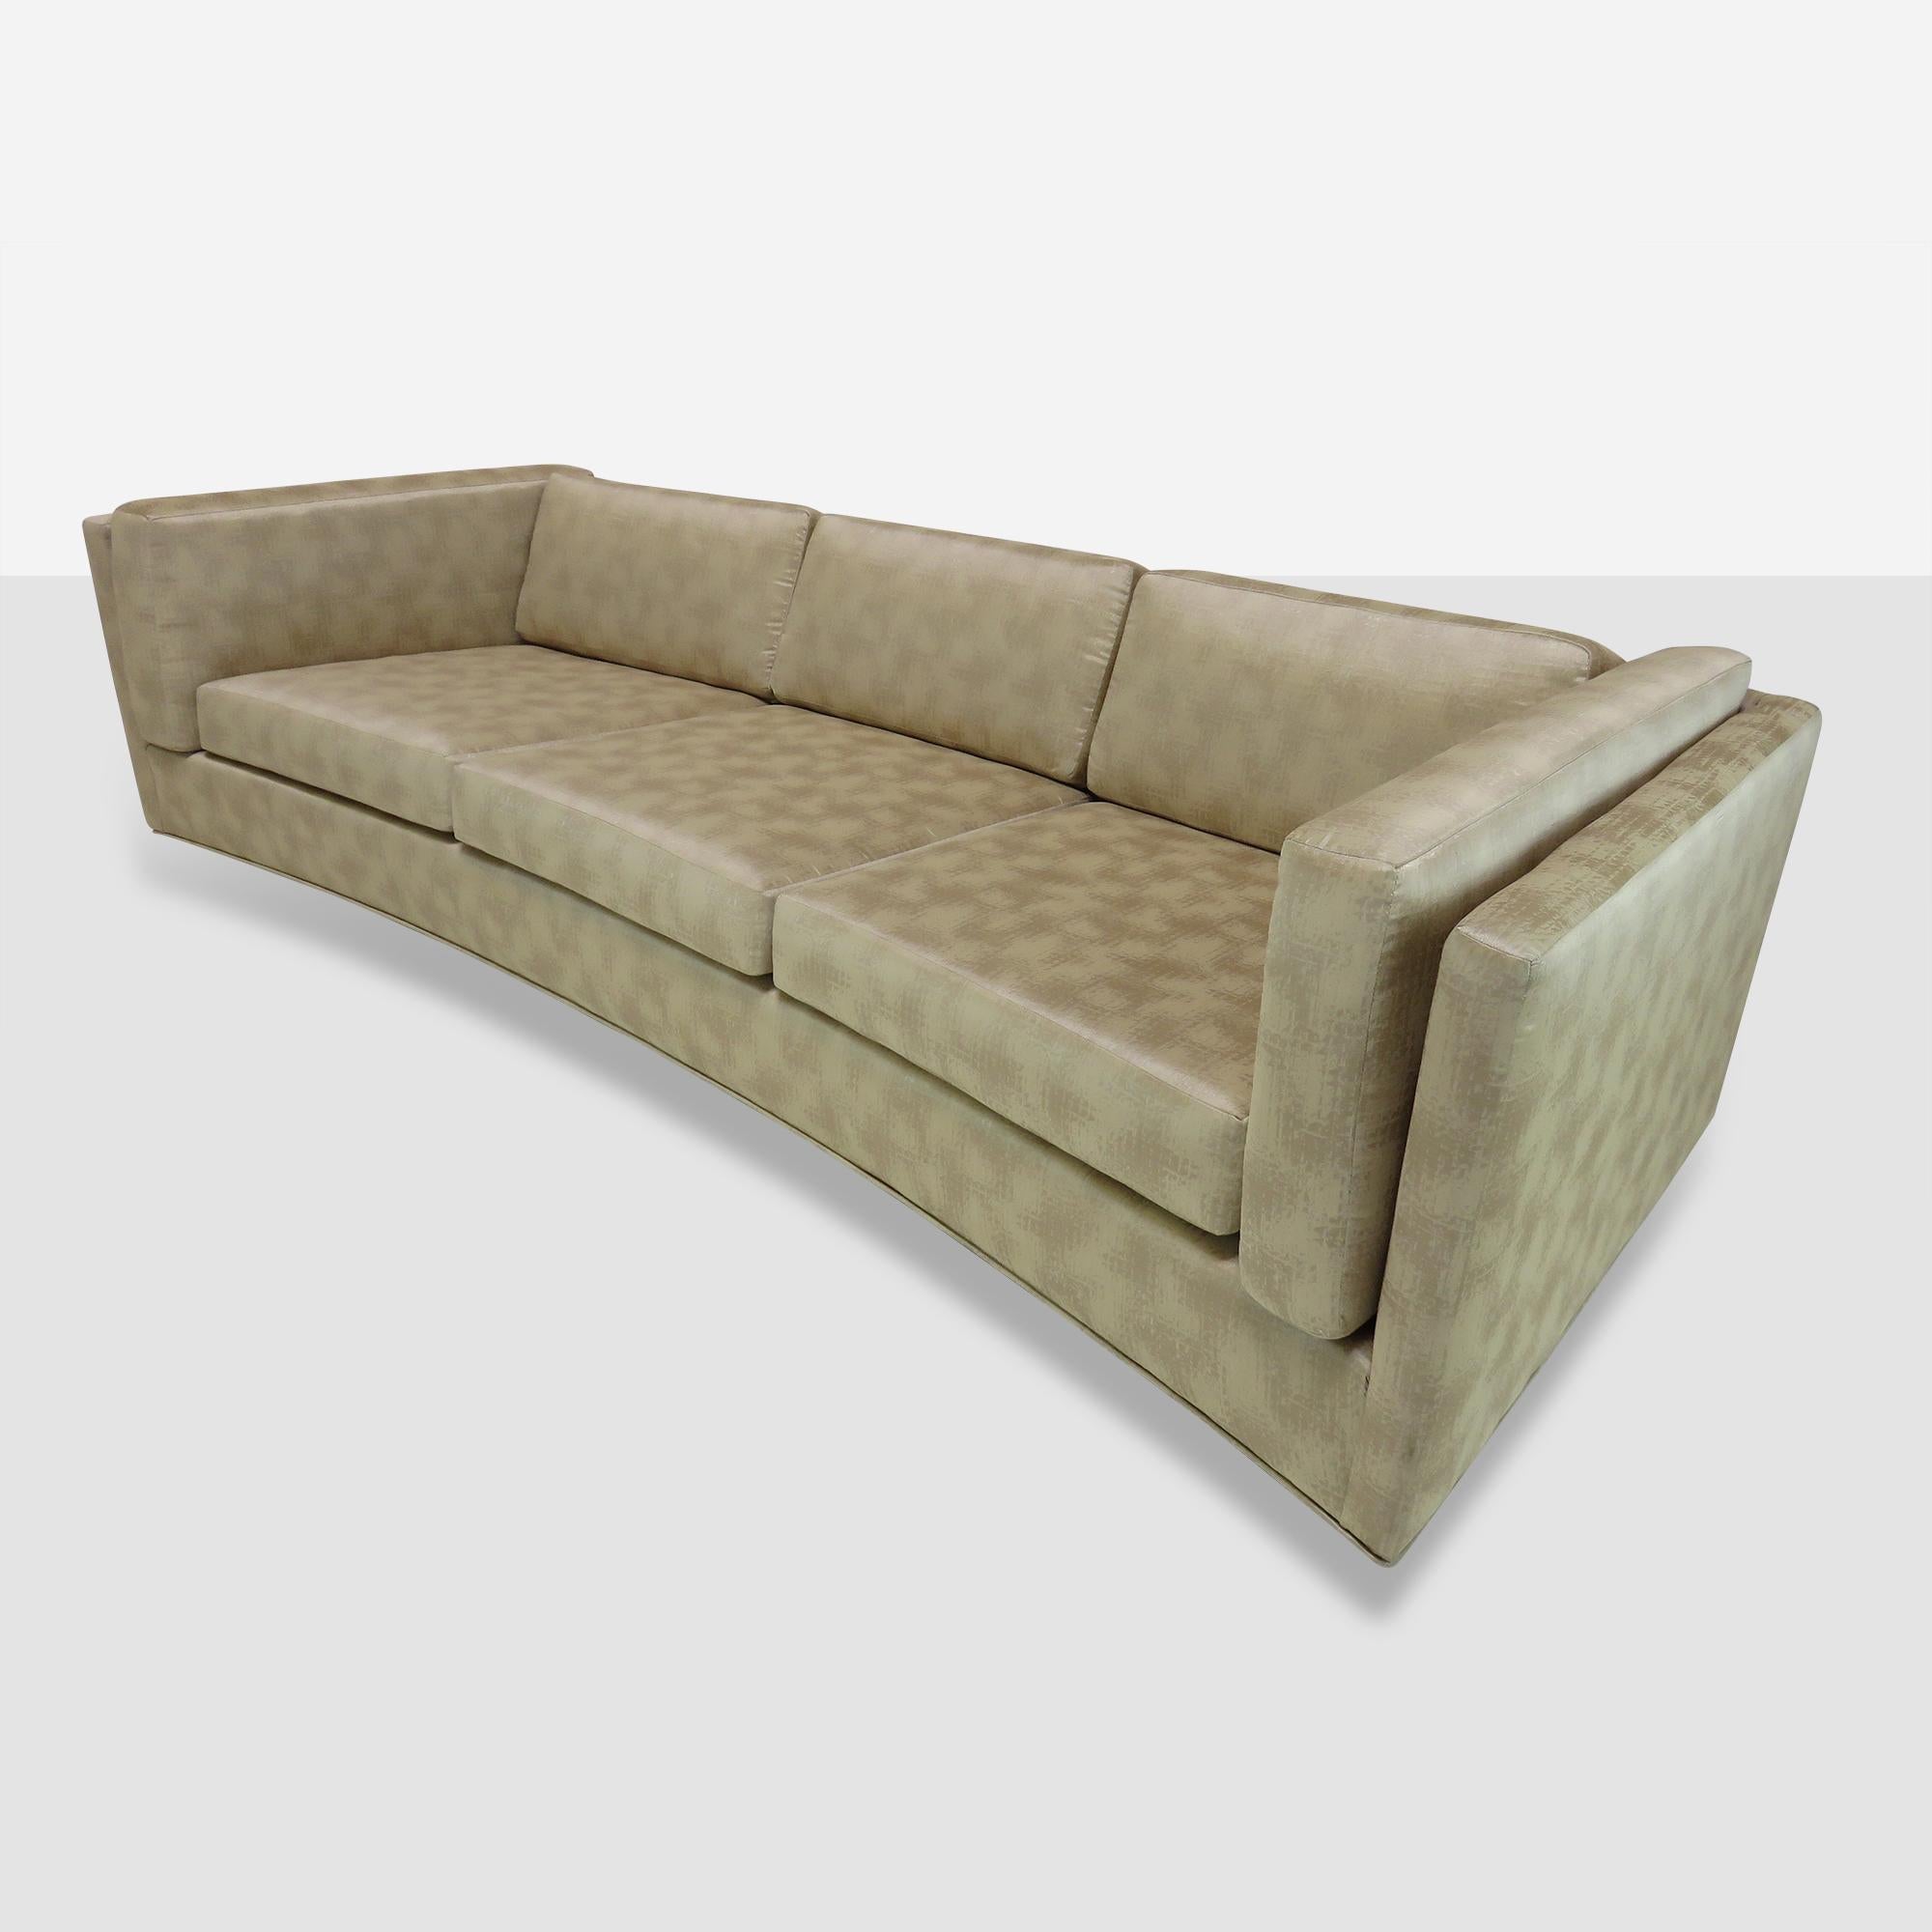 A three-seat sofa by Harvey Probber. Curved front. Loose cushions on the seat, back and sides. Sofa sits on 6 wooden feet.